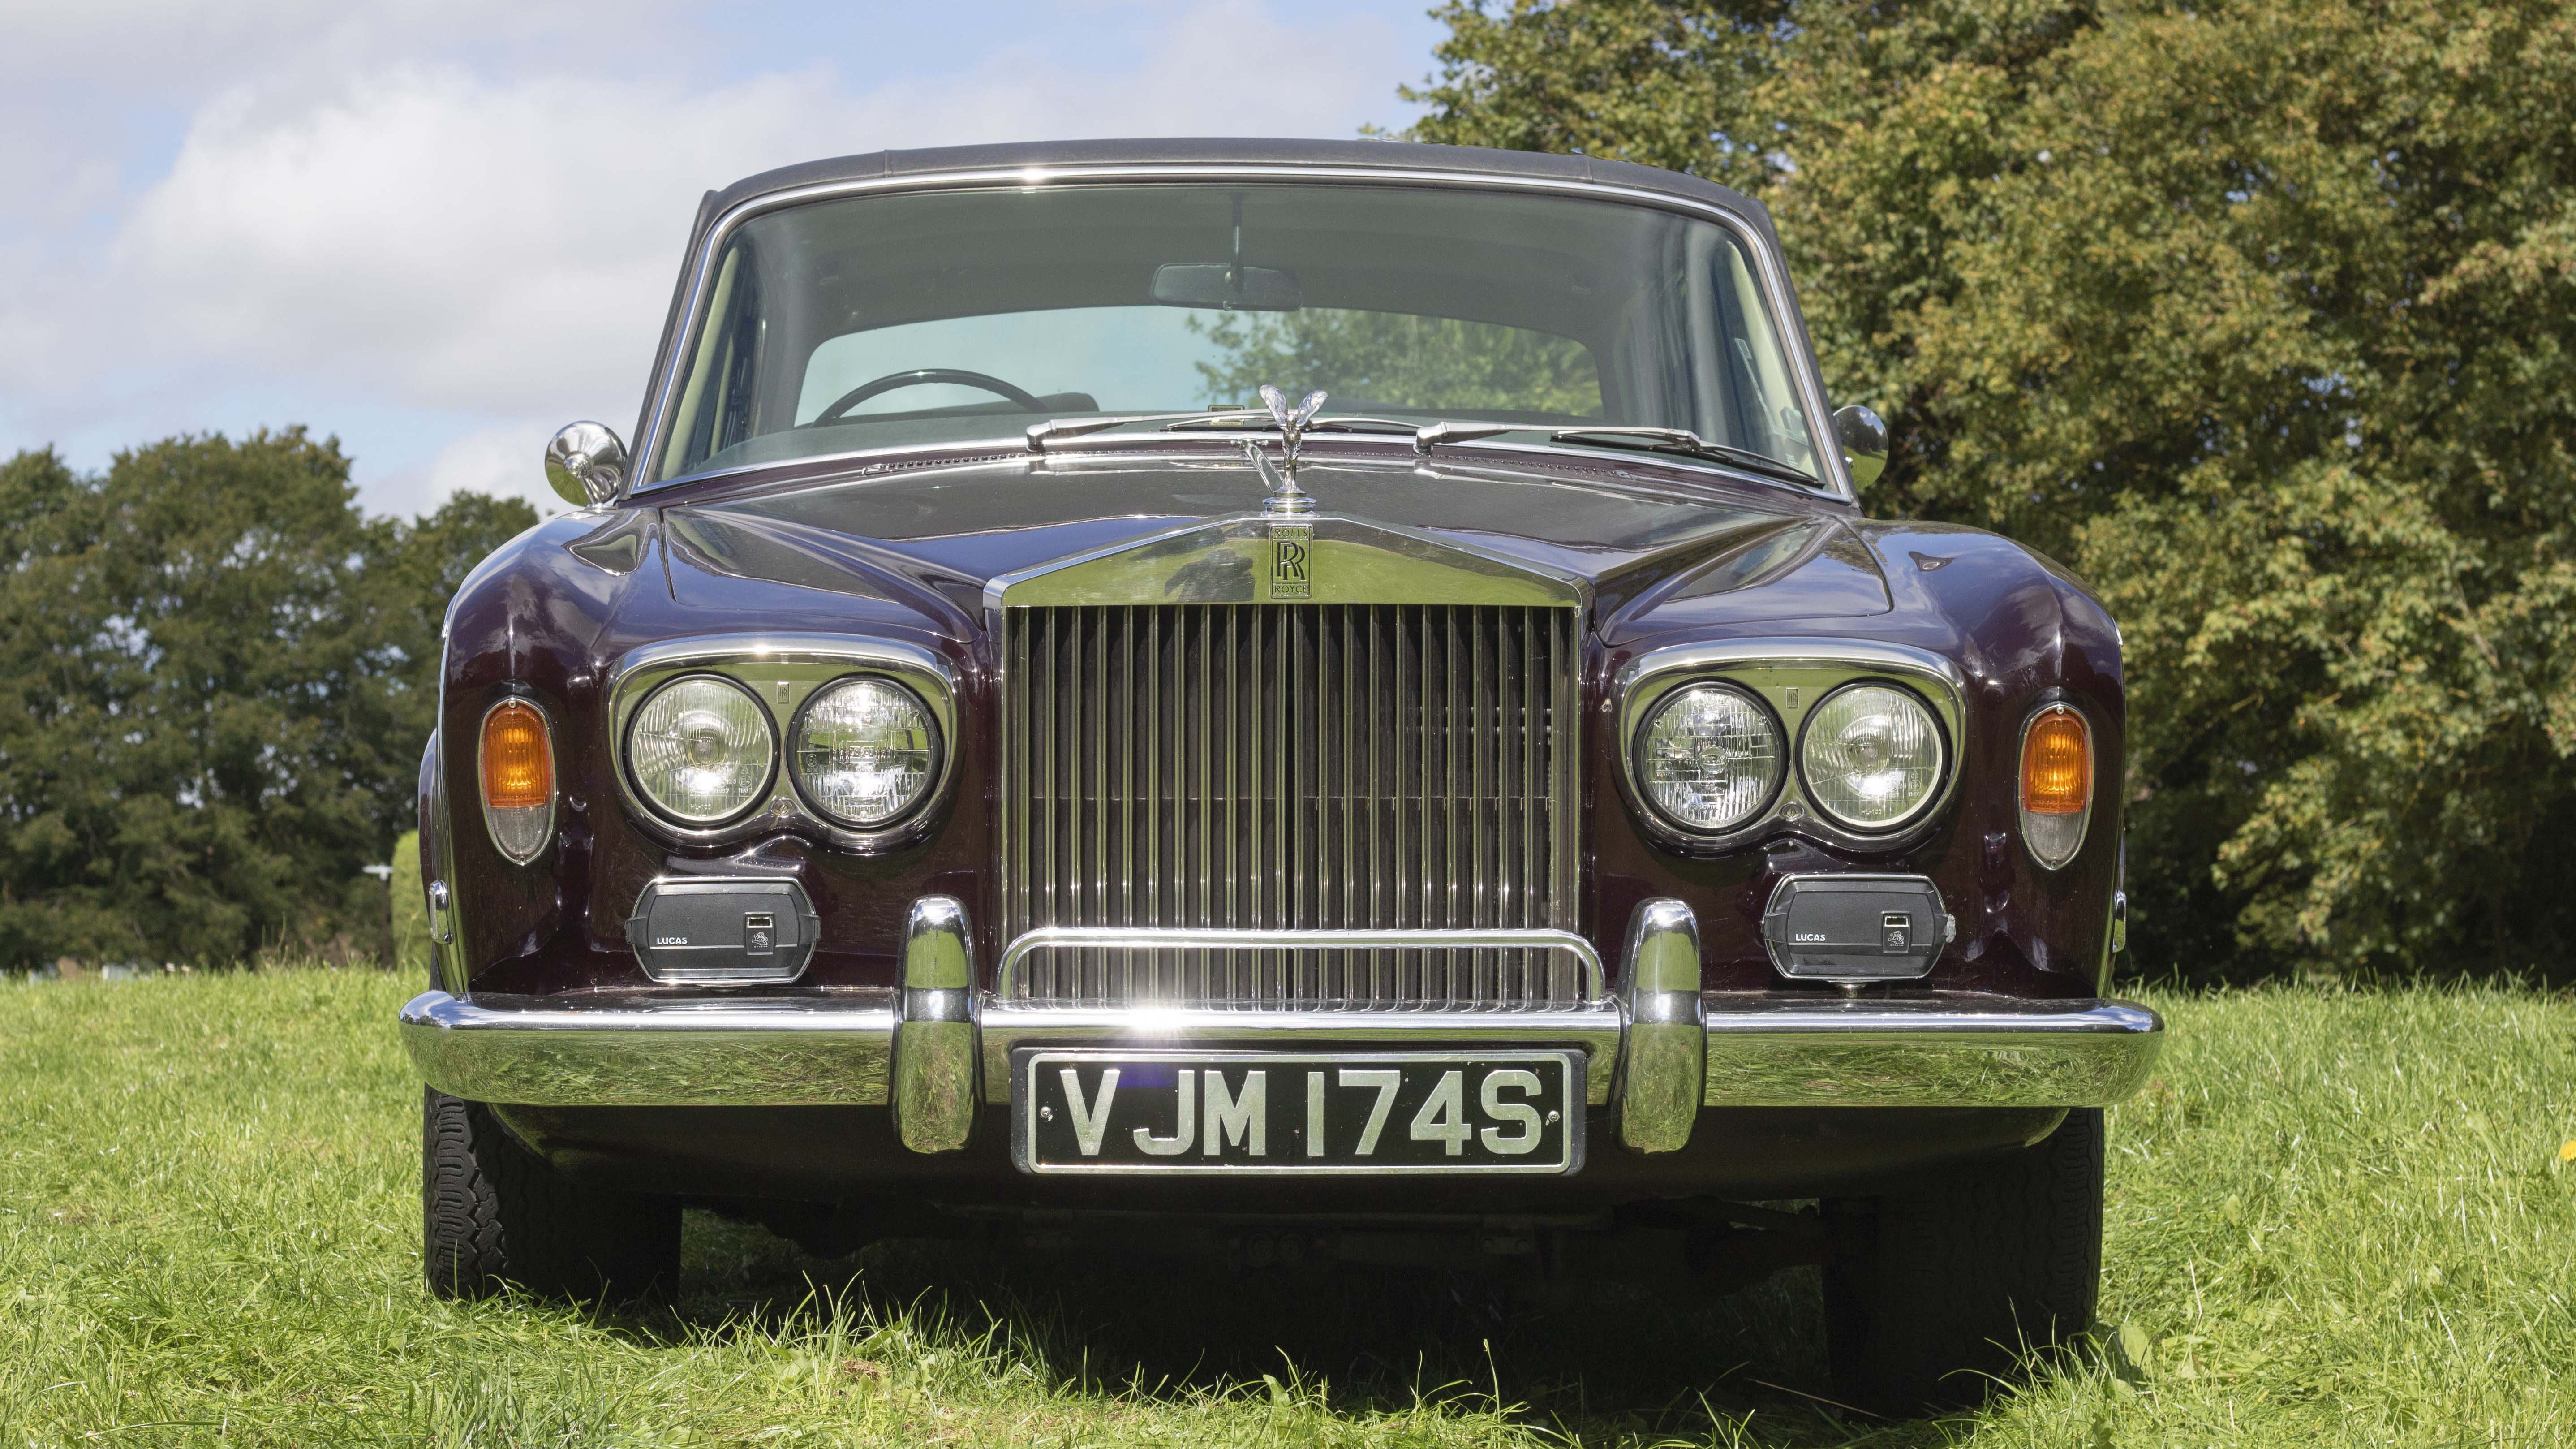 Full Front View of Classic Rolls-Royce in Garnet colour showing the iconic Rolls-Royce Grill and twin headlights